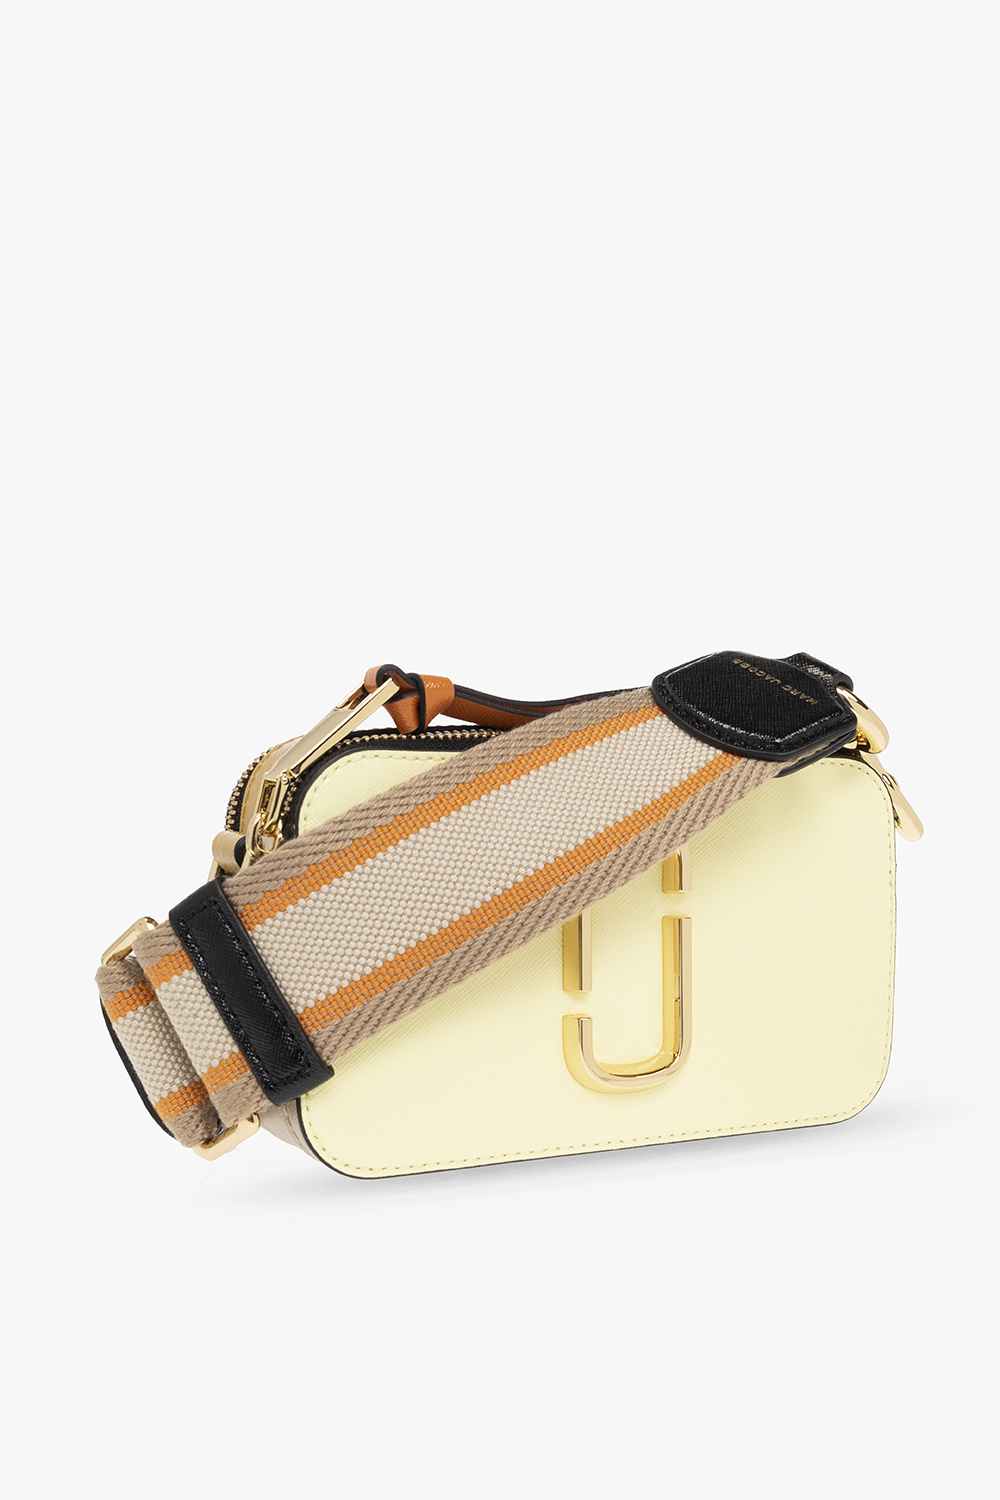 Snapshot leather crossbody bag Marc Jacobs Yellow in Leather